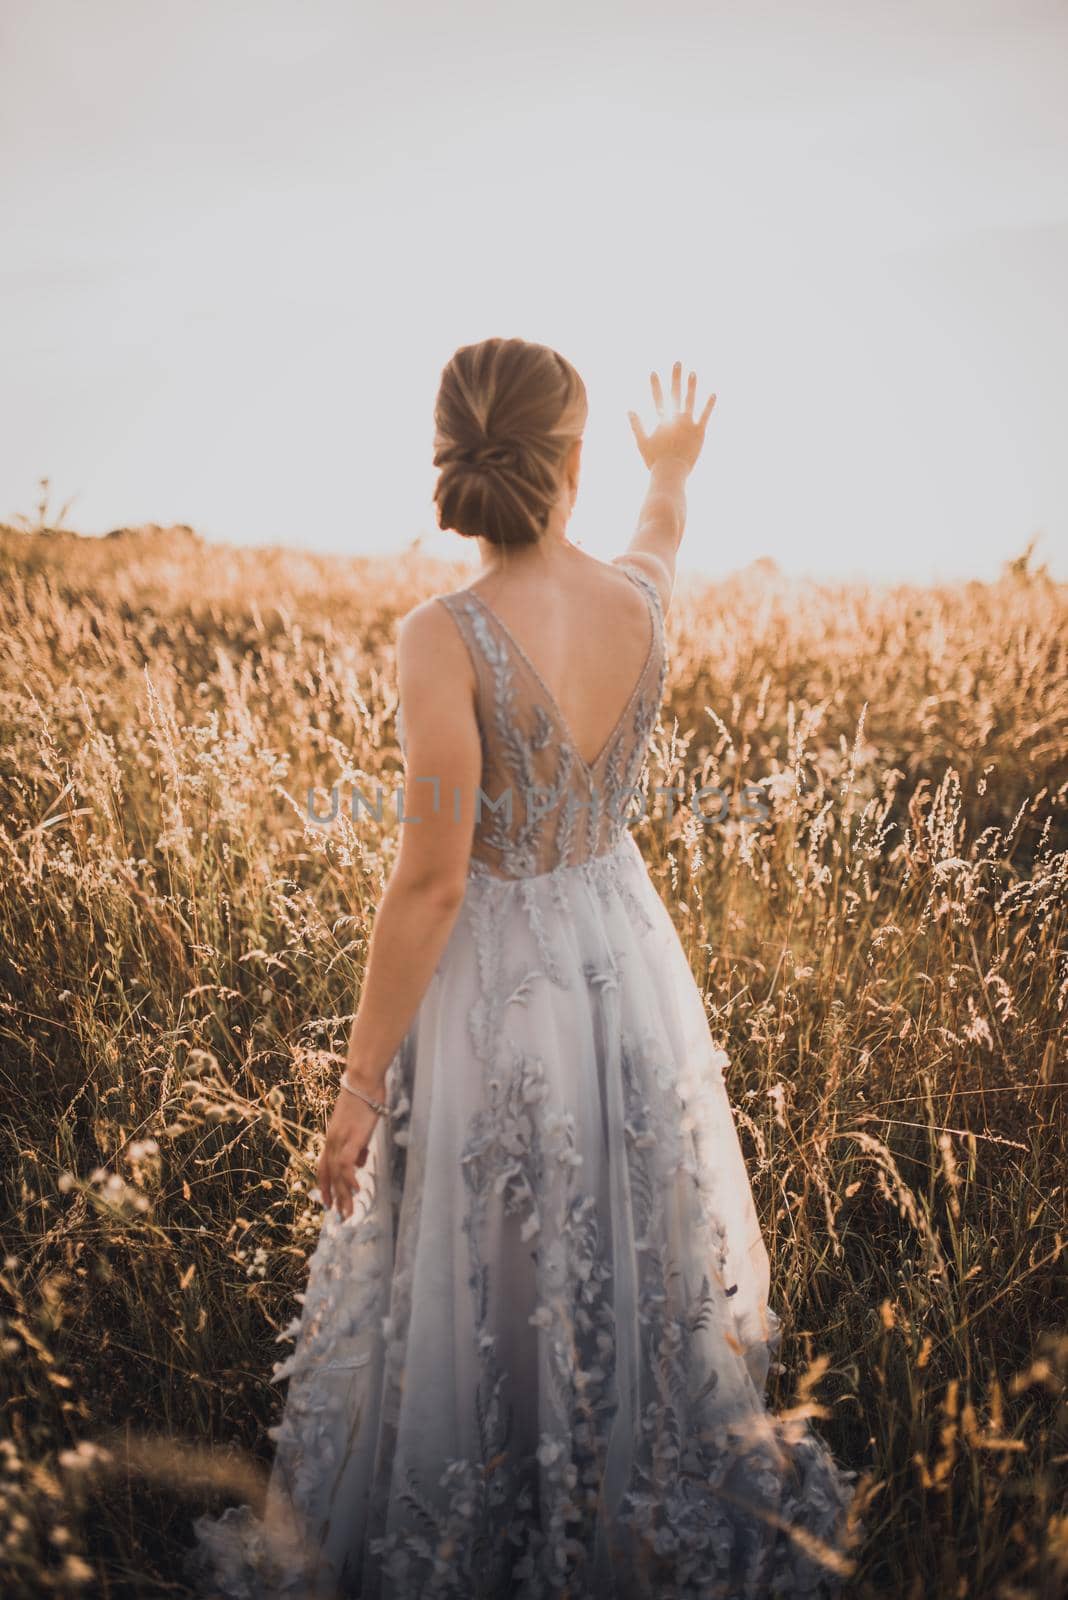 The young beautiful girl in a gray dress with an open back raised her hands up and closes the rays of the sun. against the background of blurred tall yellow grass at sunset.